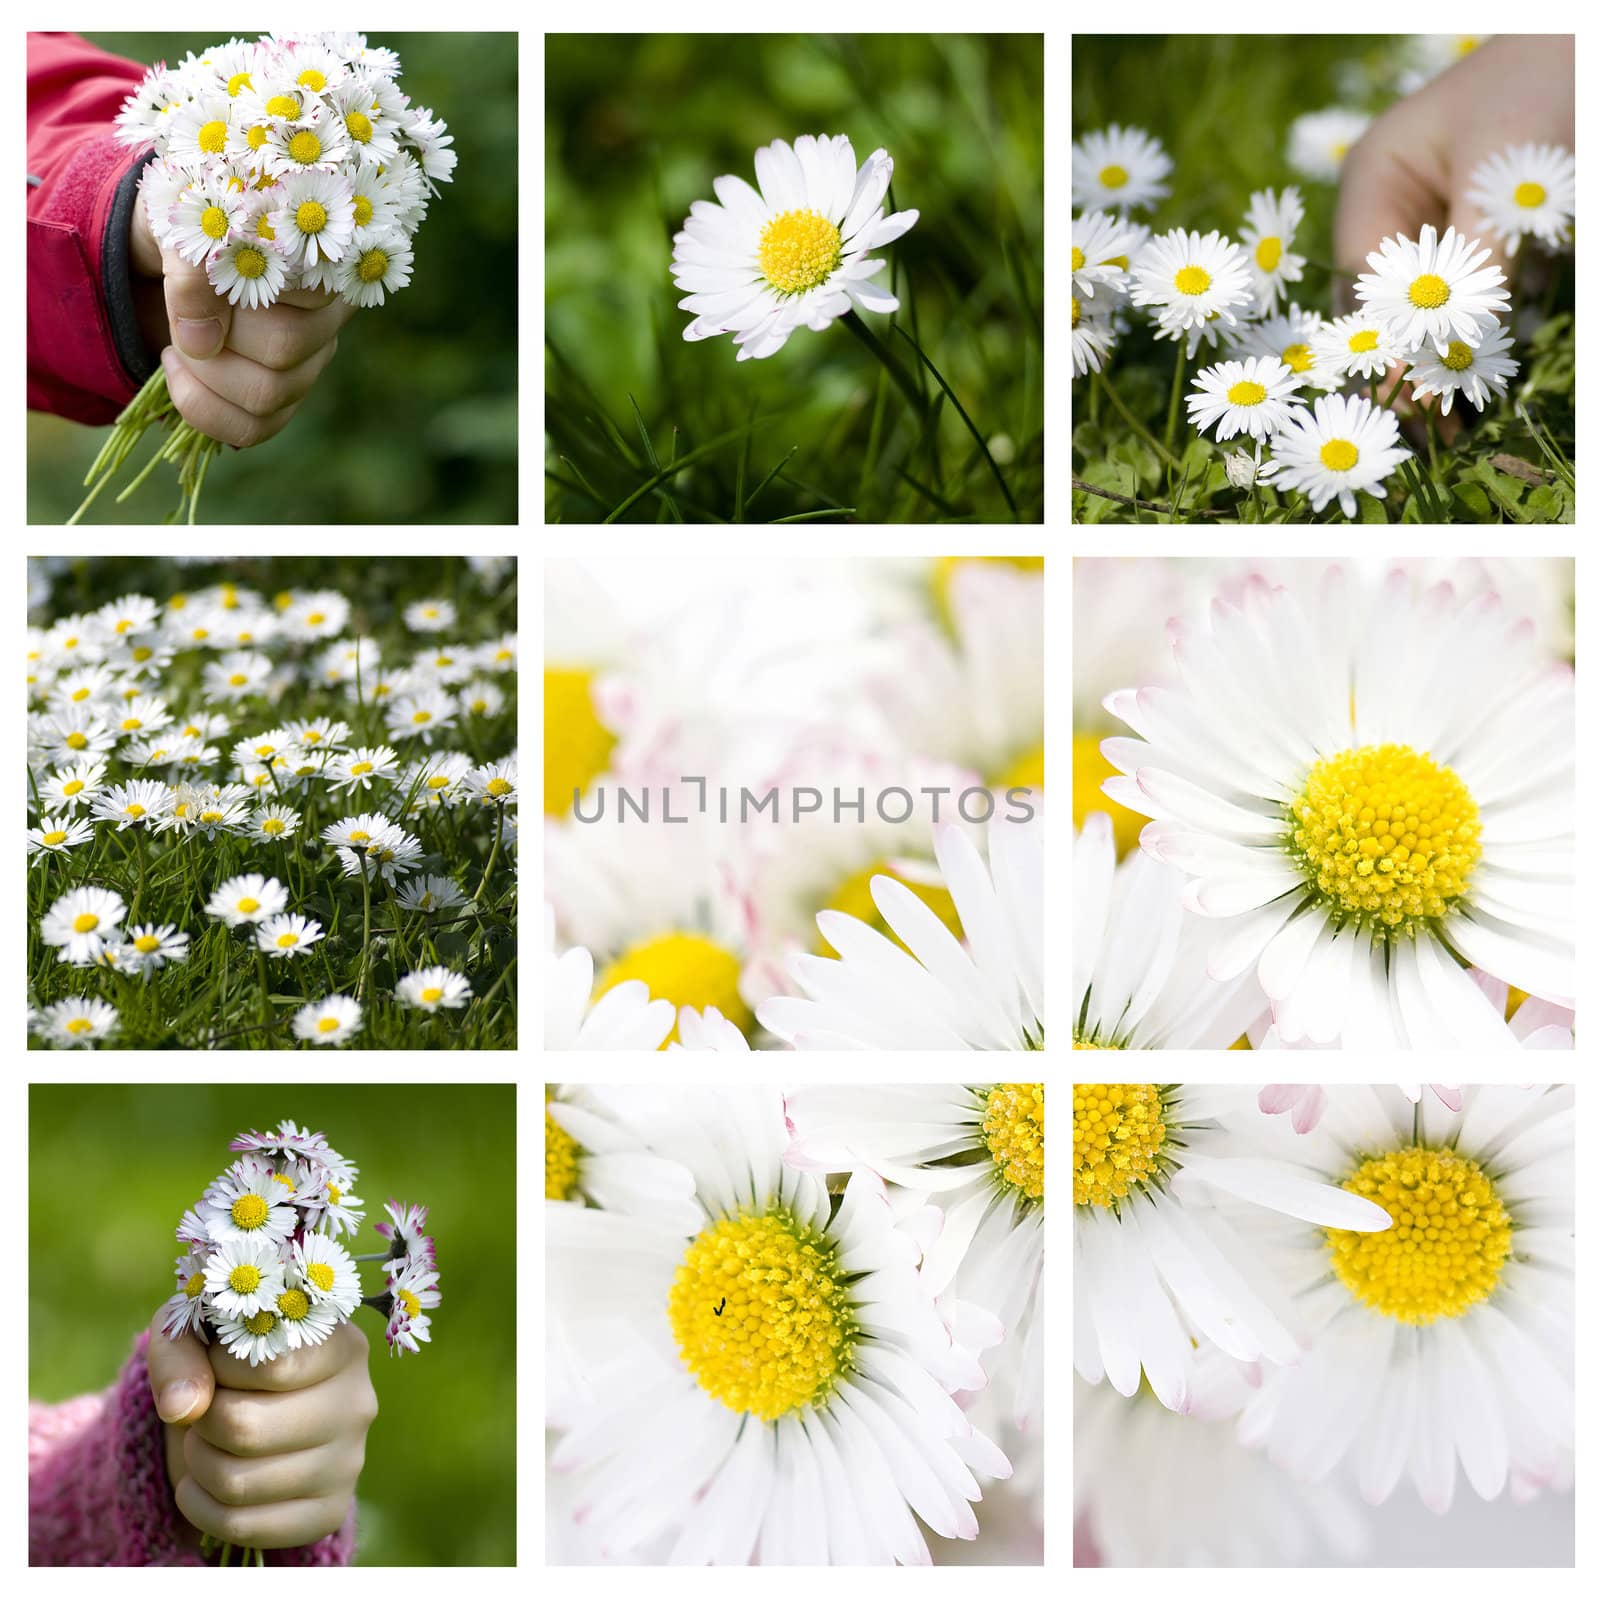 Collection of daisies - spring collage by miradrozdowski